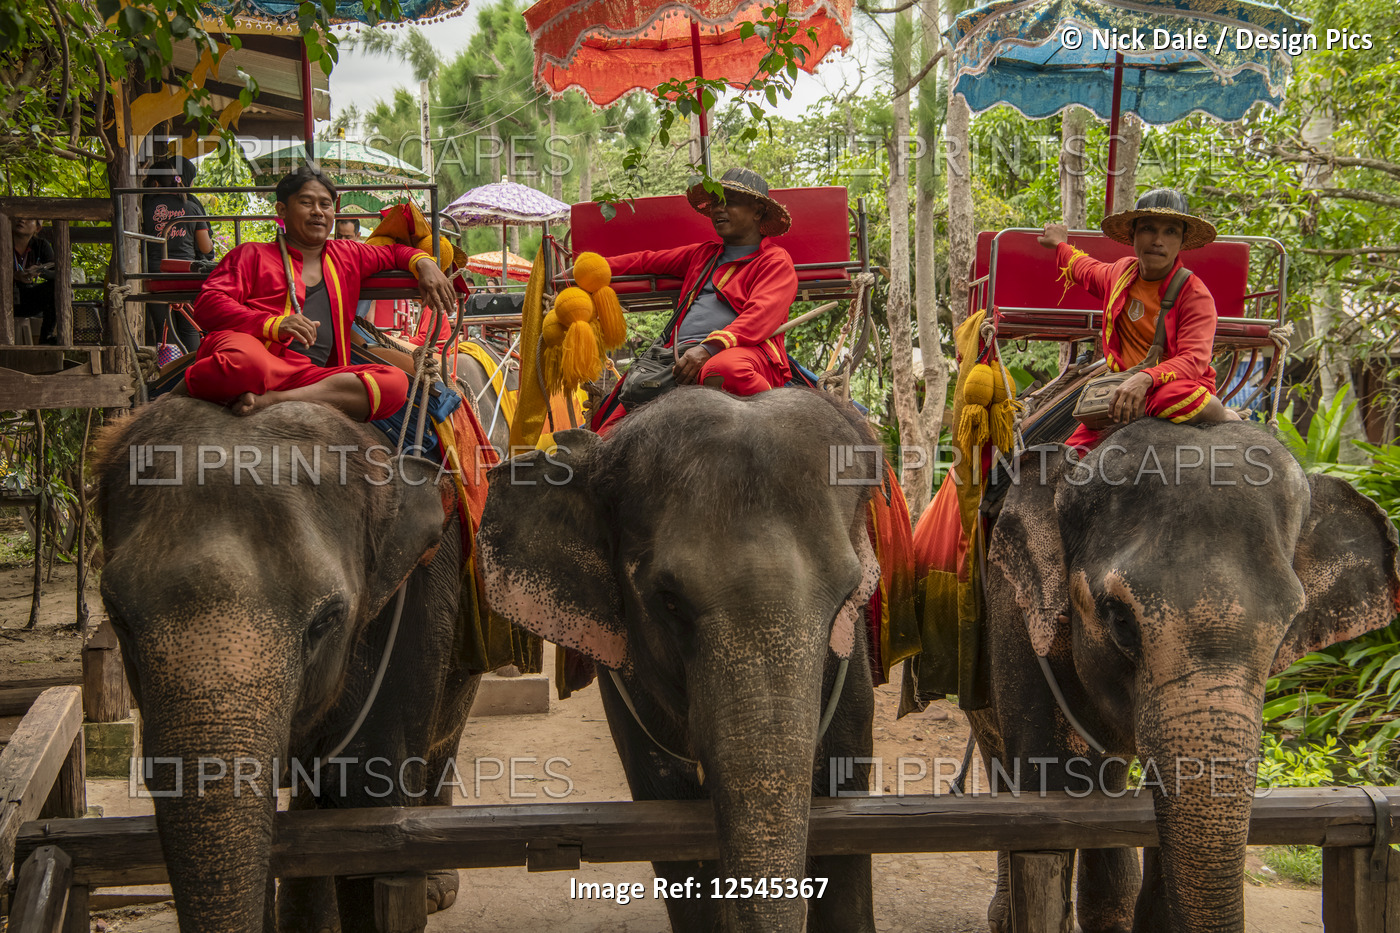 Three elephants with mahouts sitting in howdahs, Chang Puak Camp; Bangkok, ...